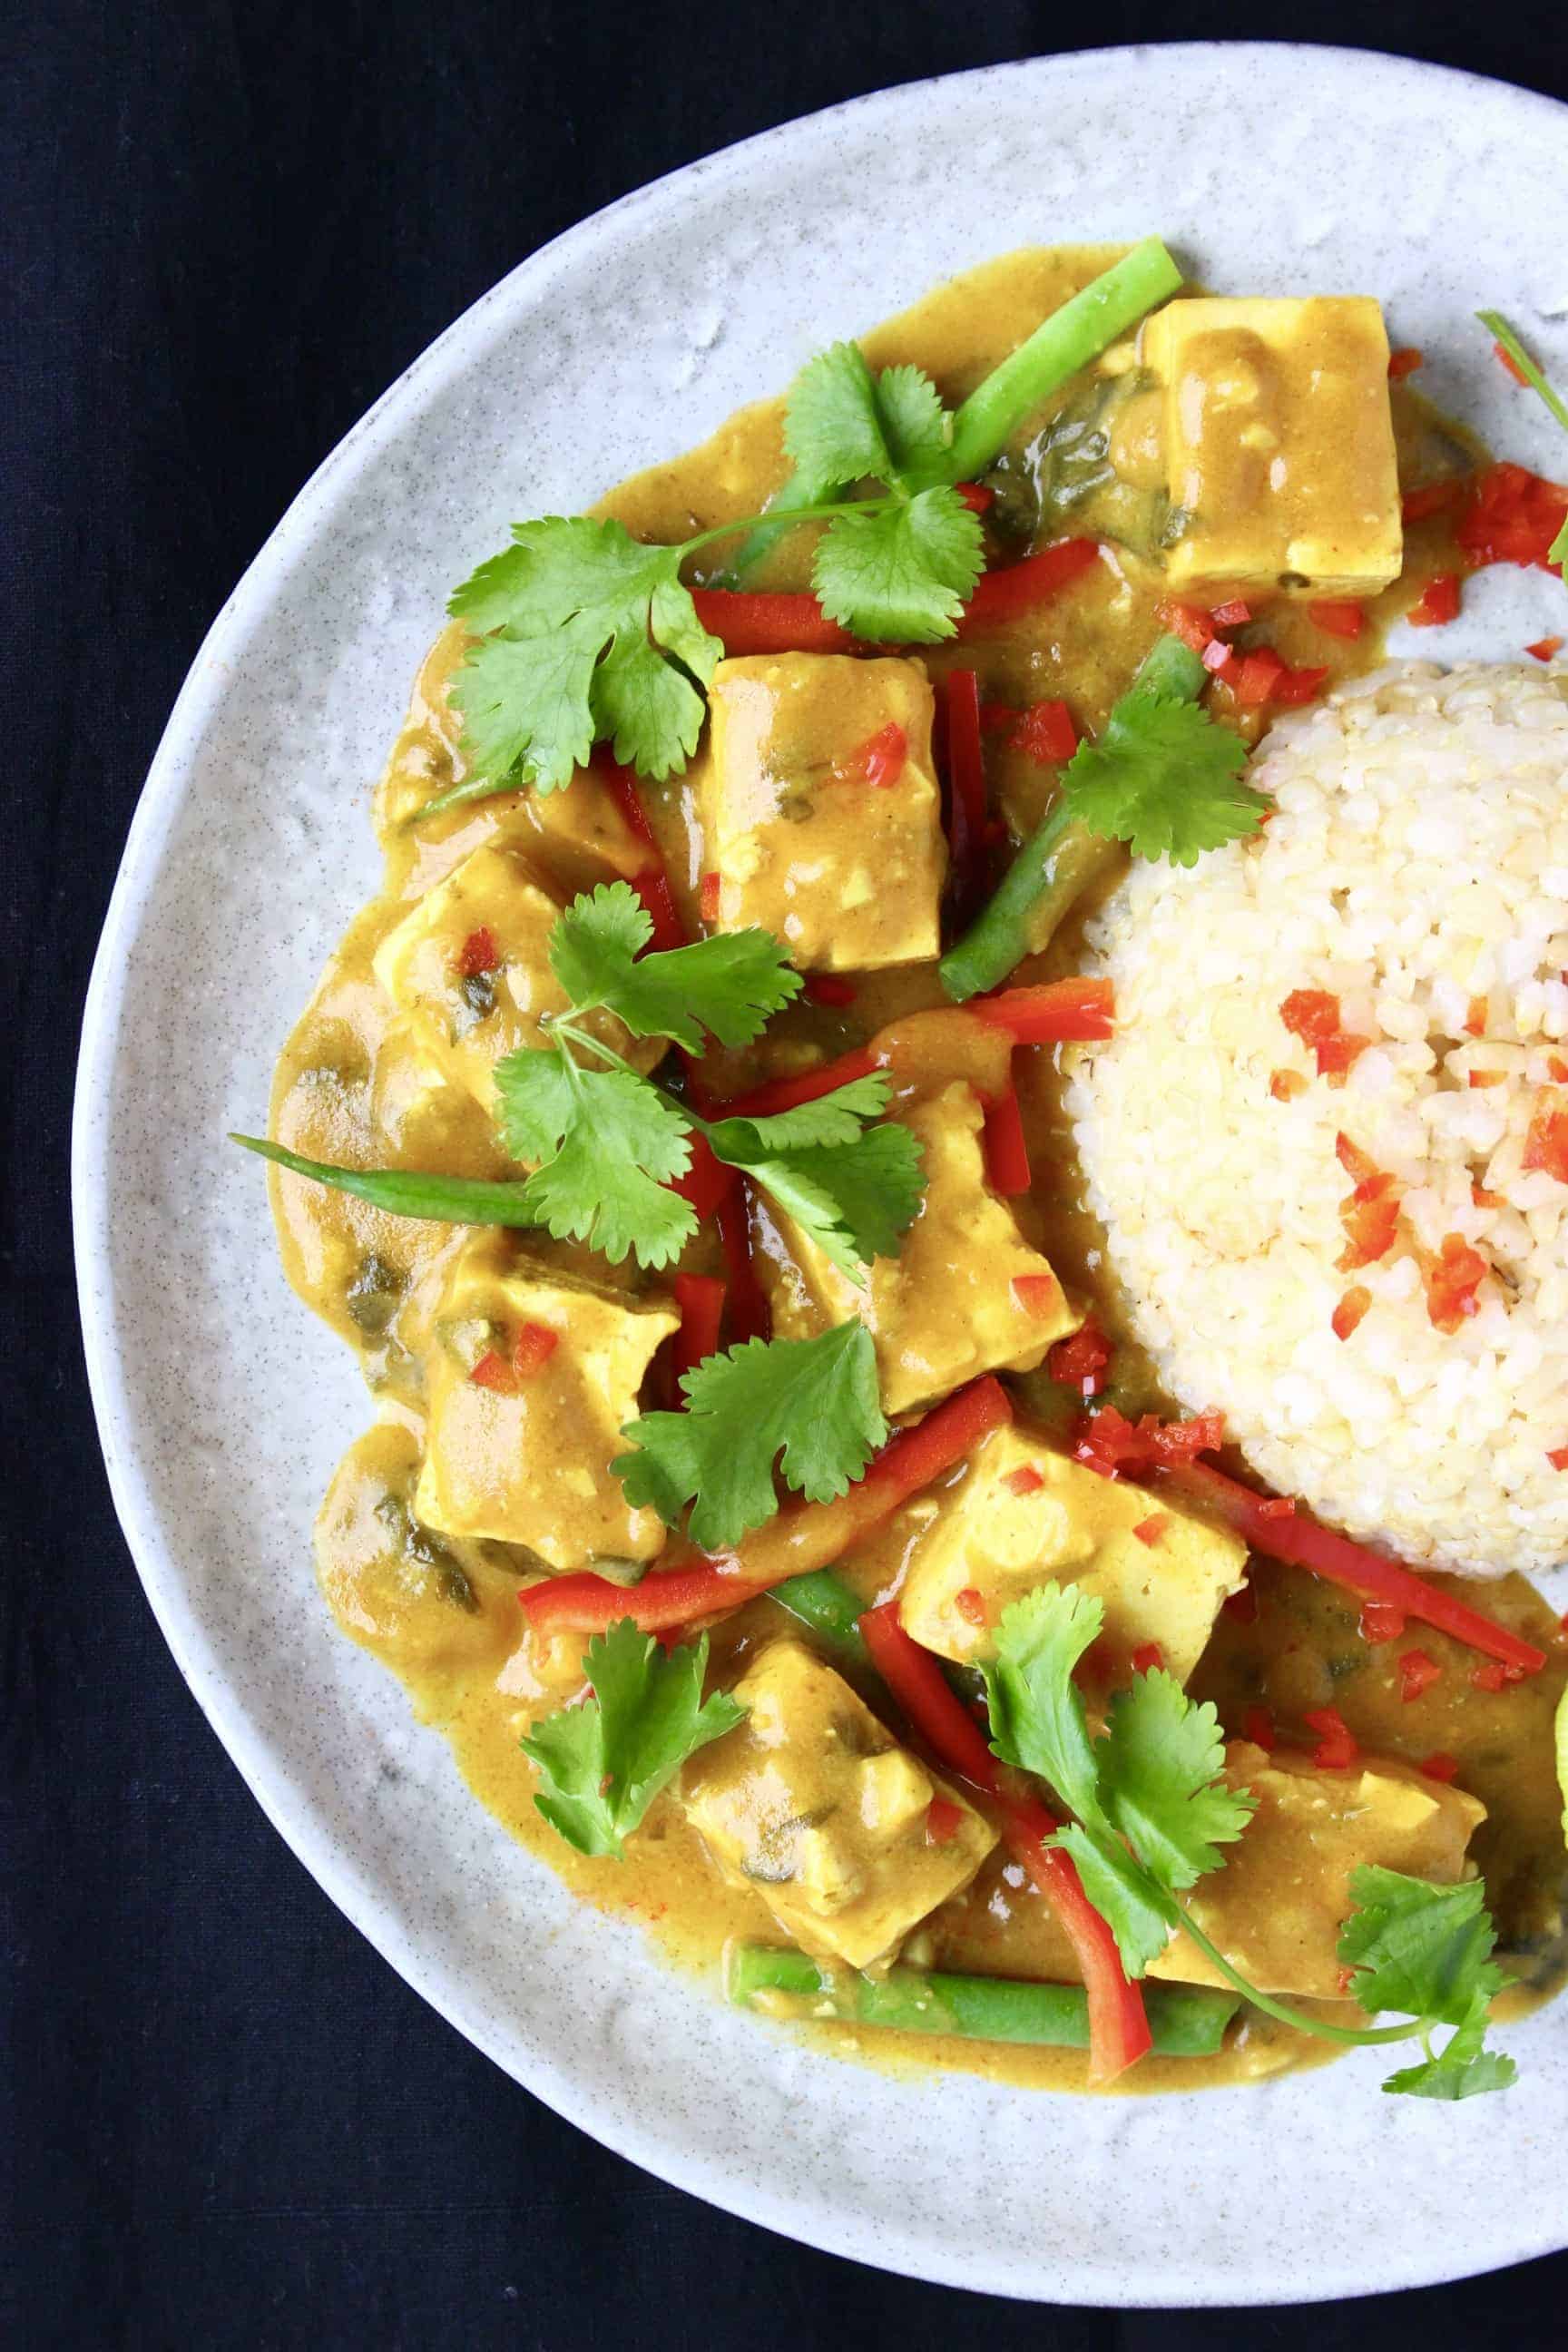 Peanut tofu satay curry with green beans and red peppers on a plate with brown rice